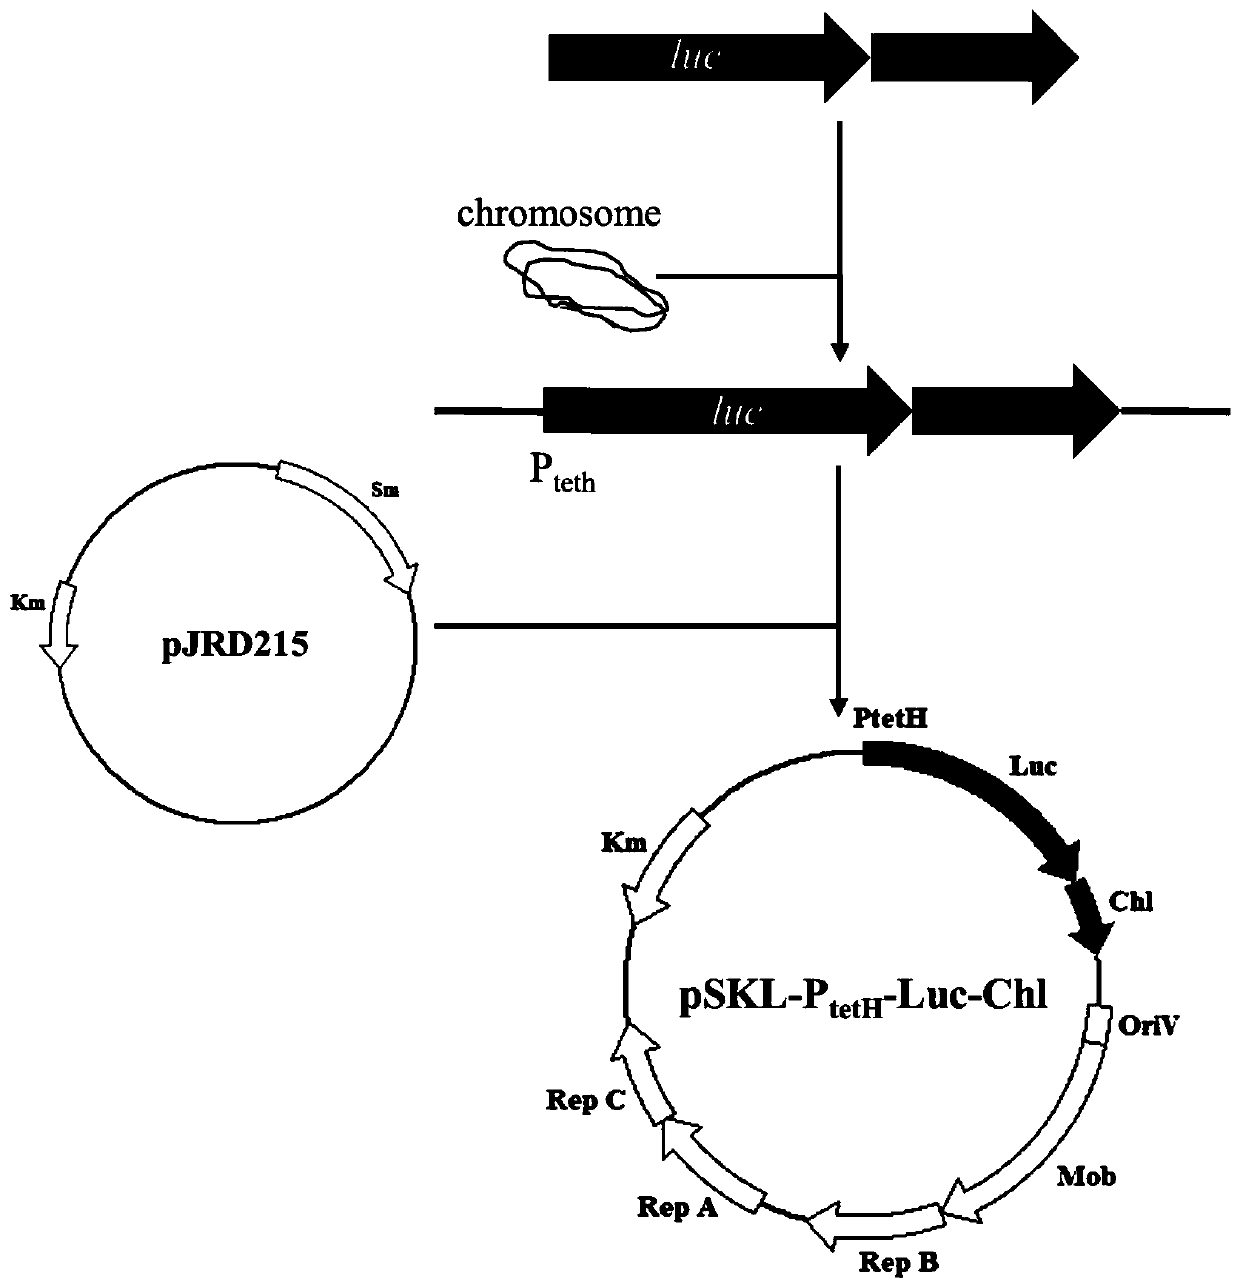 Recombinant plasmid and application of same in identification of gene expression of thiobacillus aeruginosa